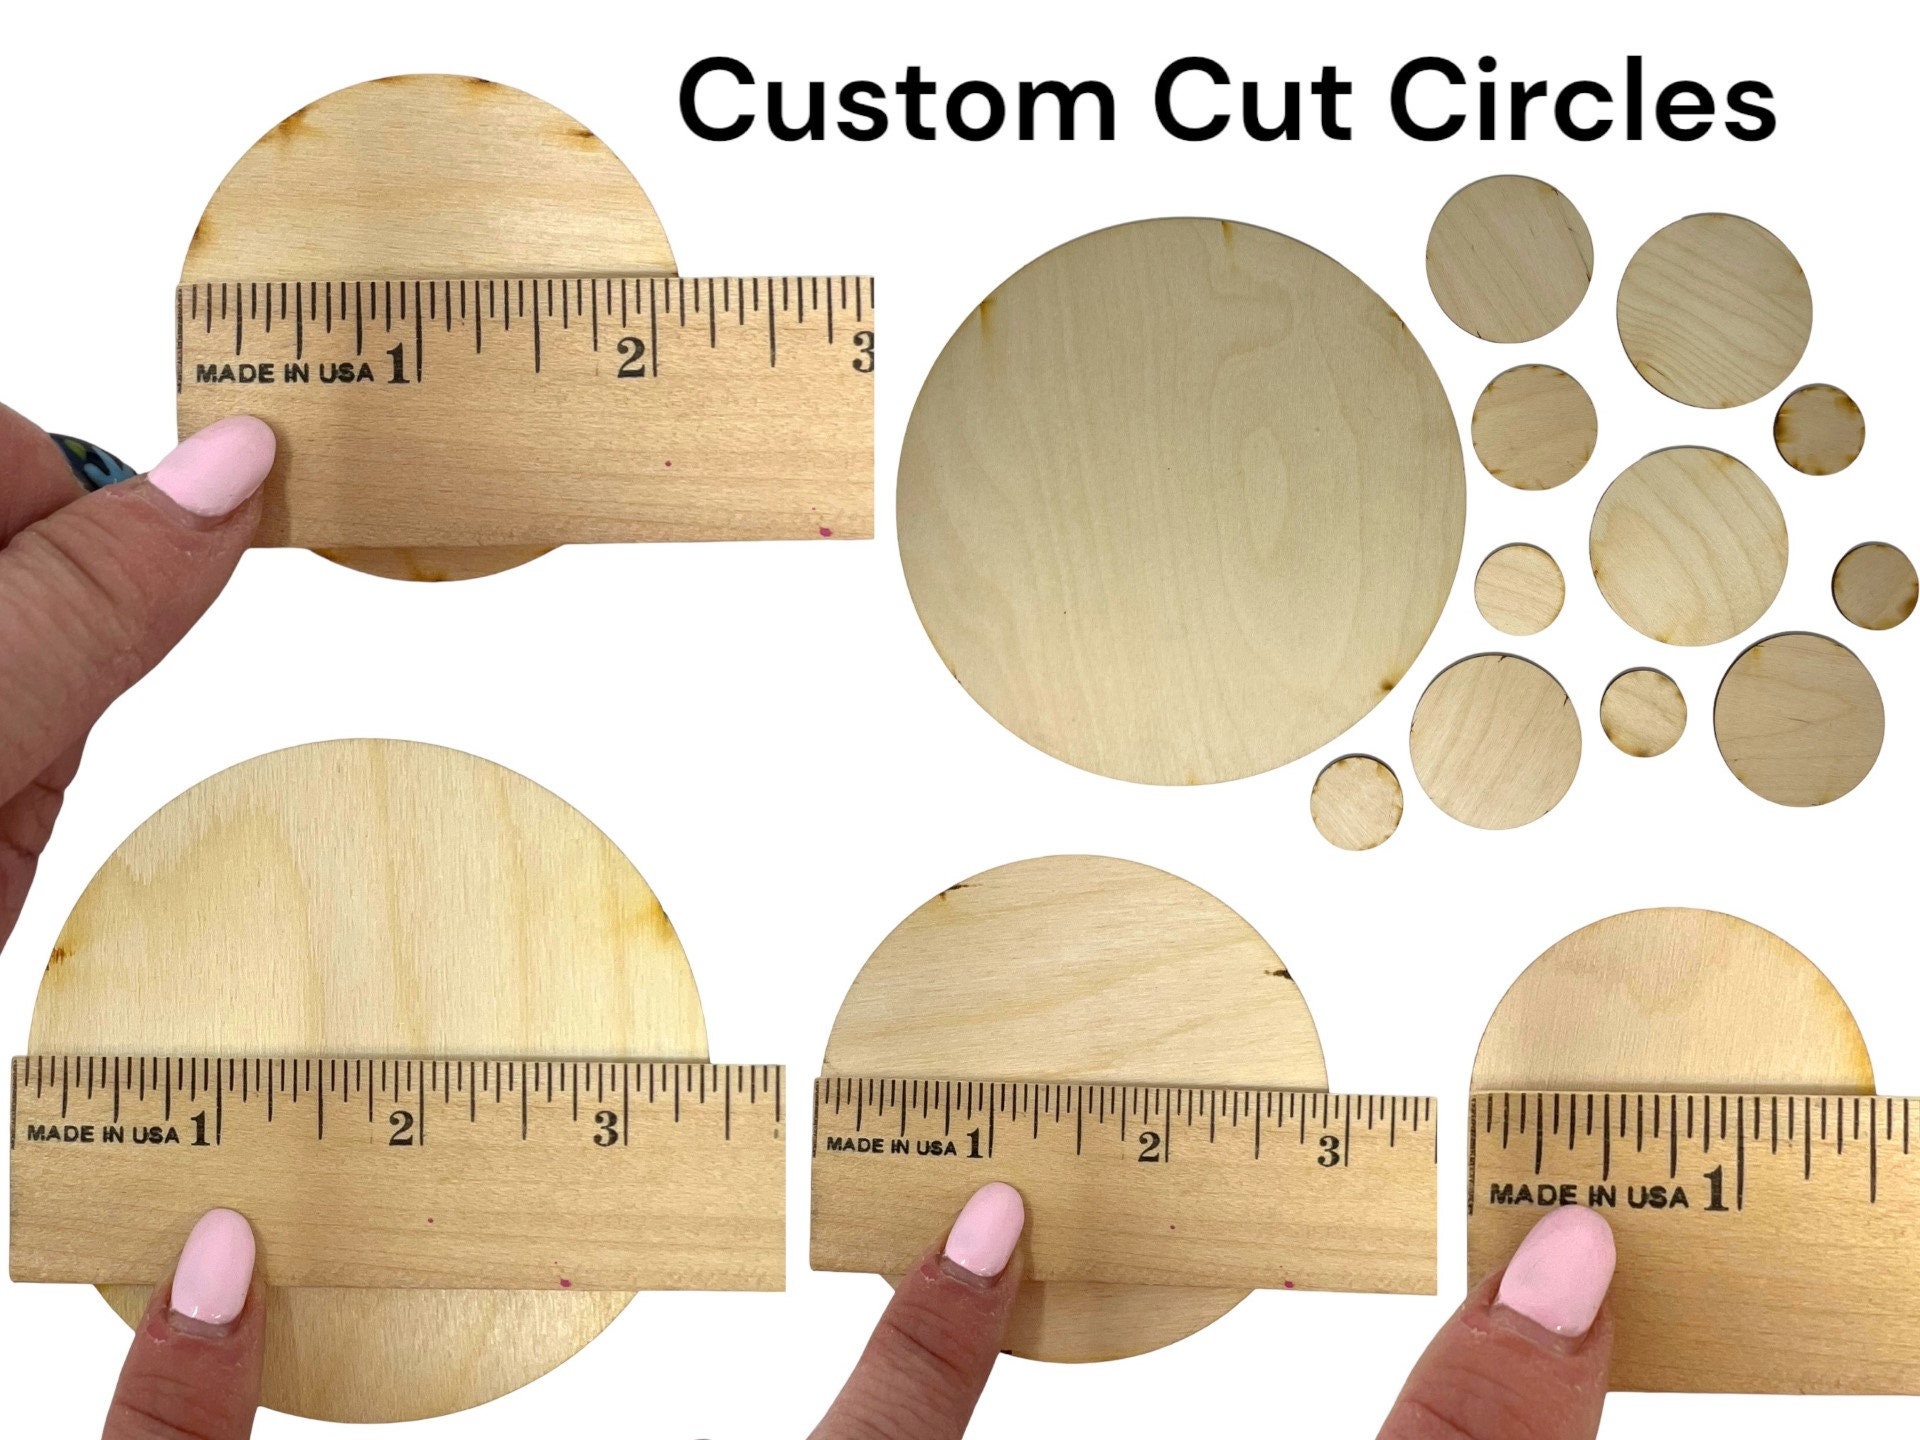 2 Wood Circle 2.25'' Diameter Unfinished Wood for Crafts, Wooden Circles  Supplies, Natural Wood Circles, Crafting Shape, Wood Burning Discs 